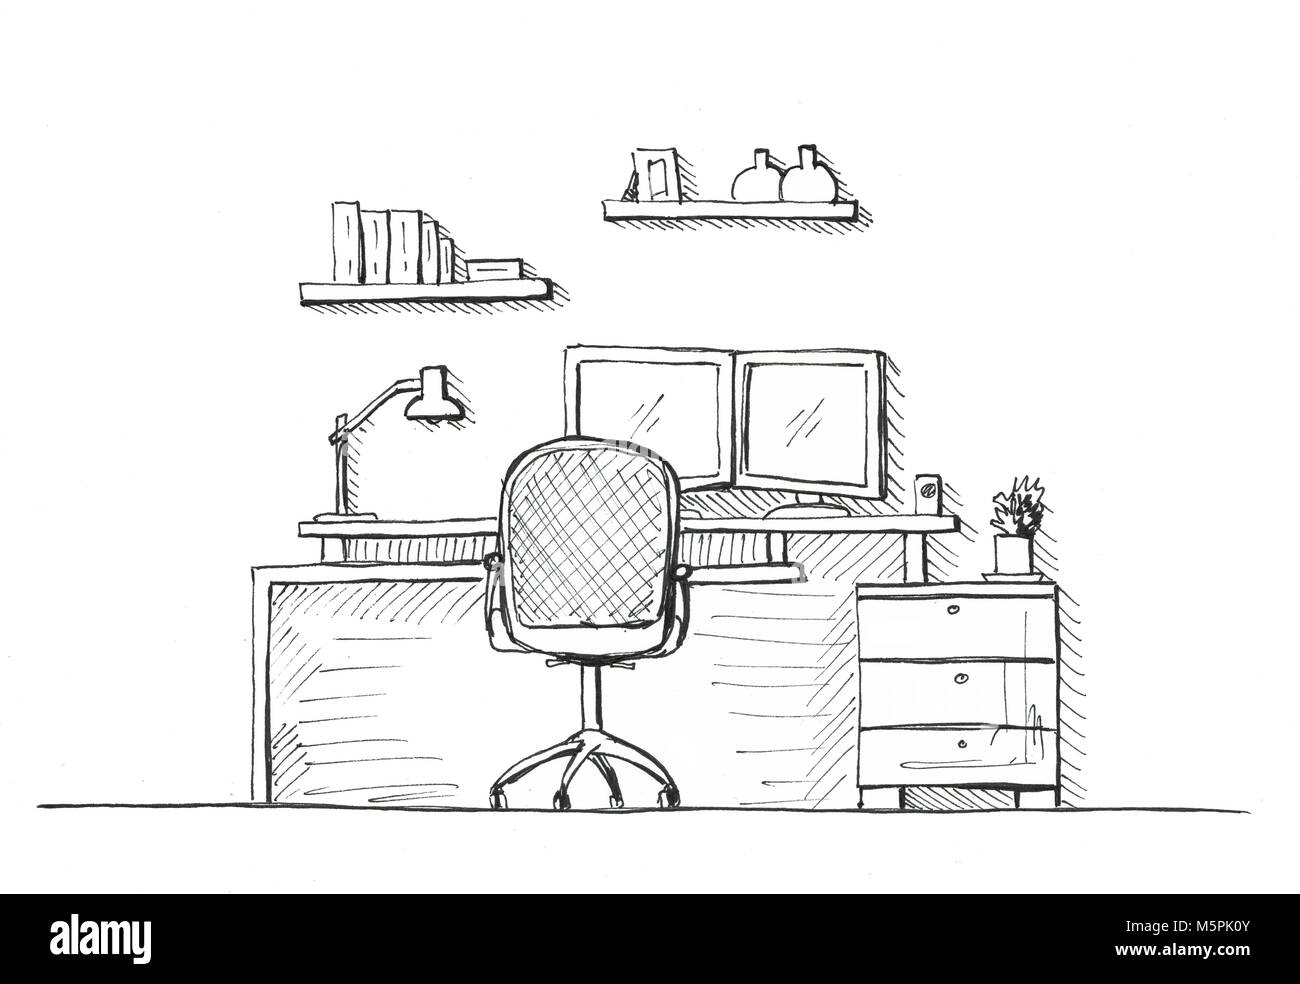 135,488 Office Table Sketch Images, Stock Photos & Vectors | Shutterstock